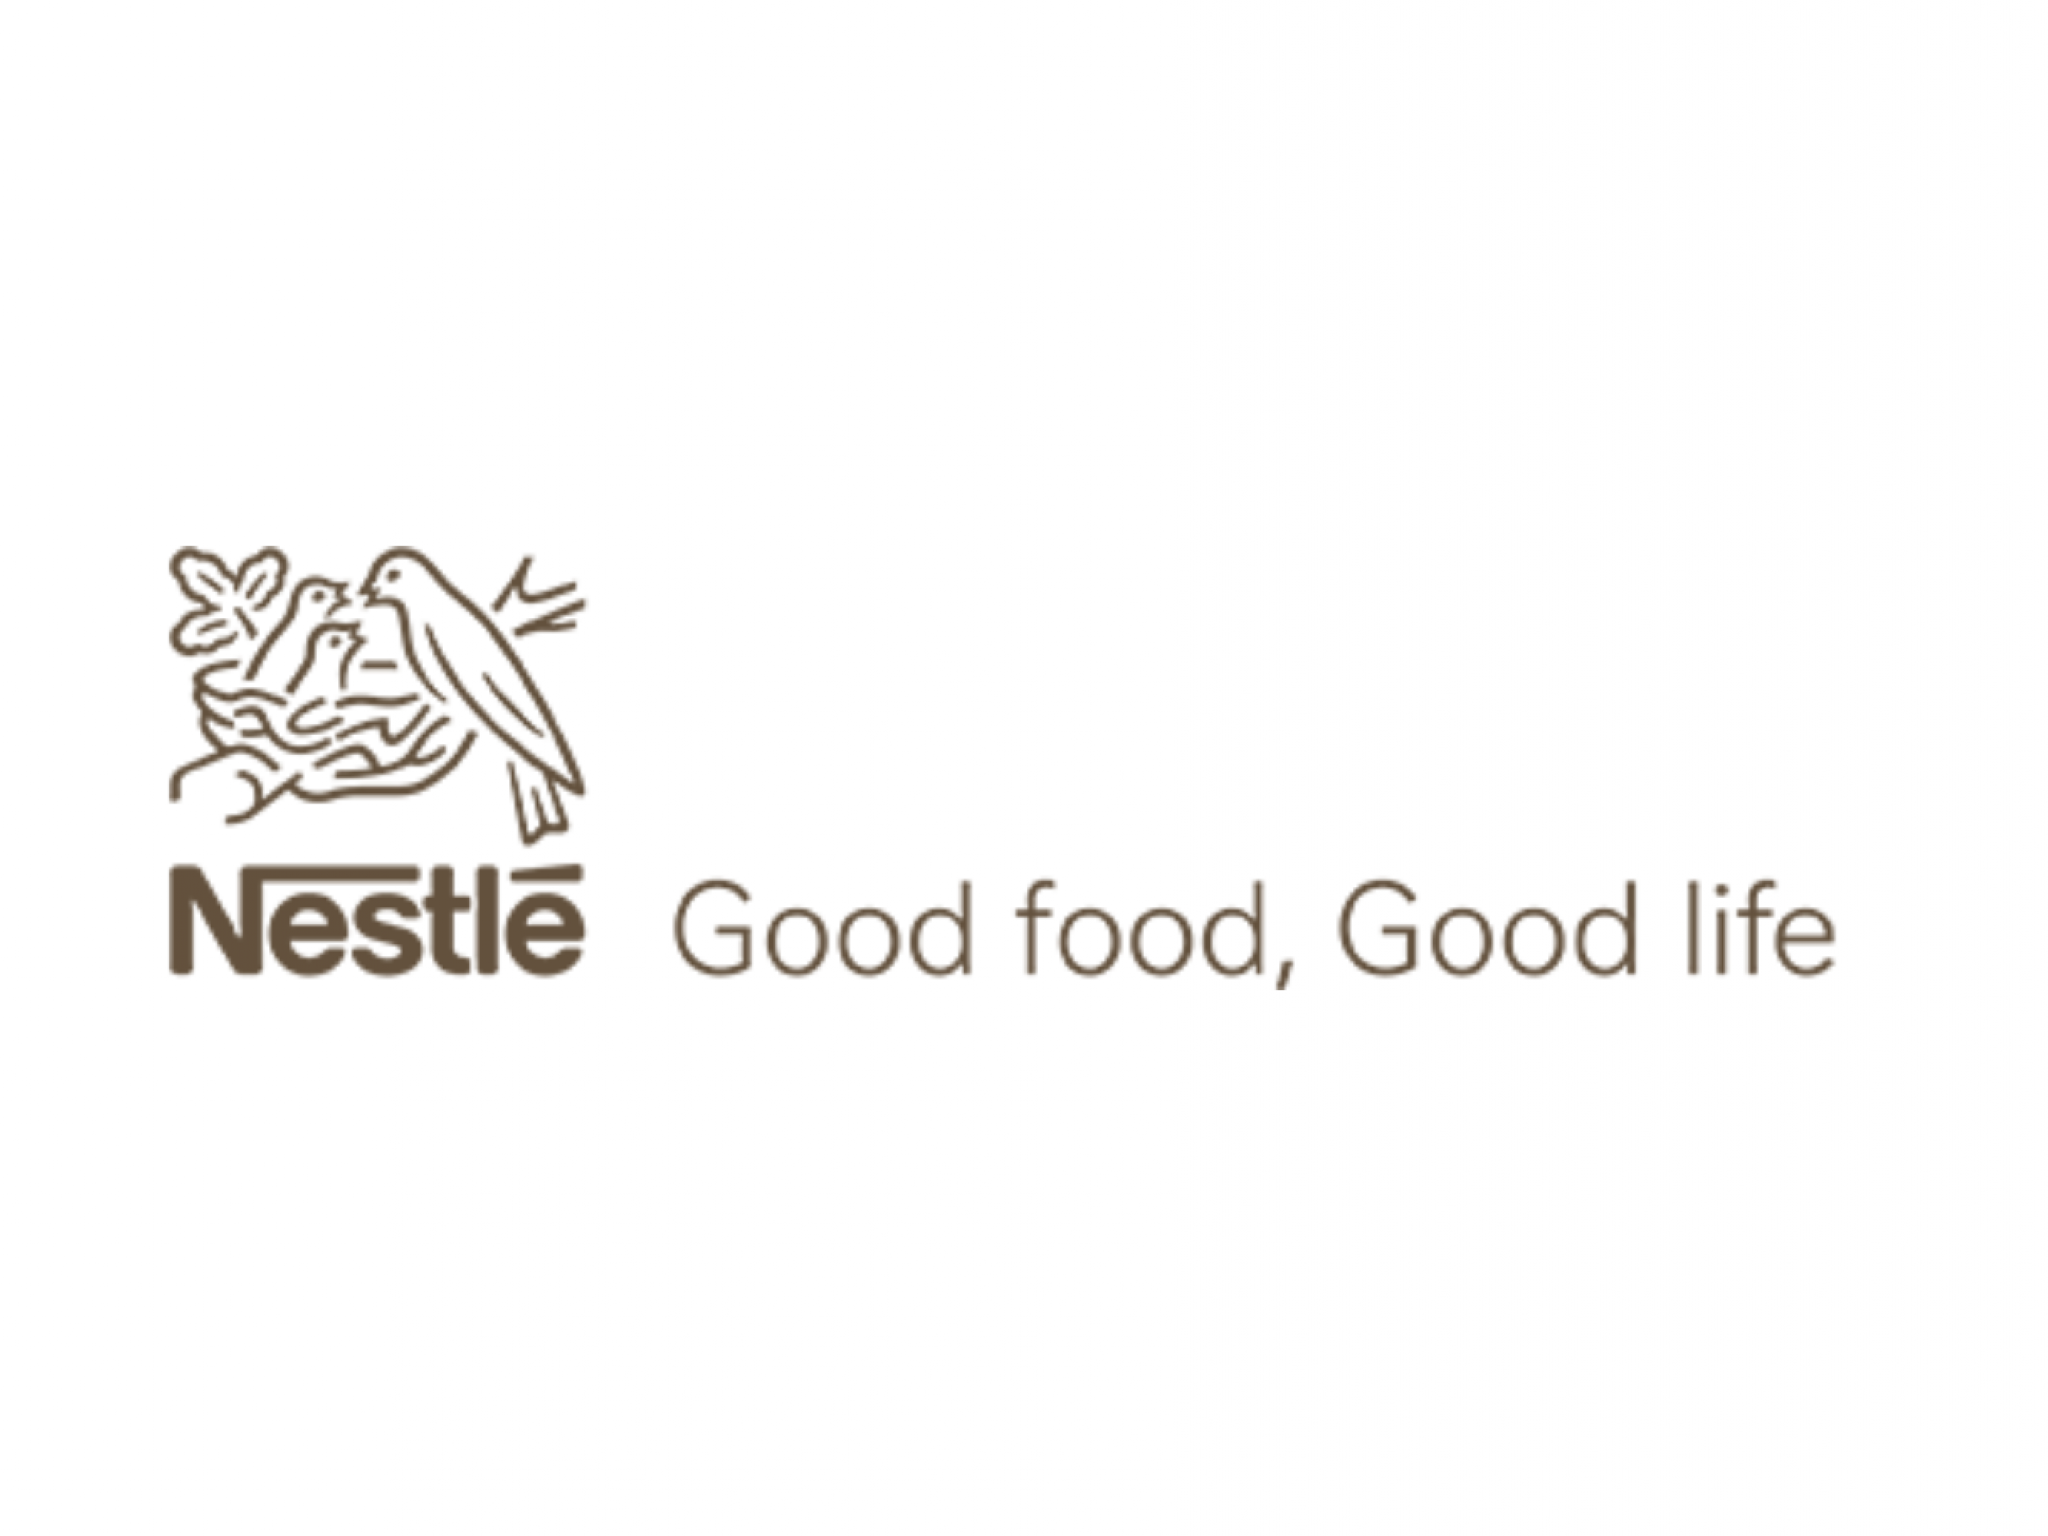  nestle-ups-the-high-end-gifting-game-buys-major-stake-in-premium-chocolate-maker-of-brazil 